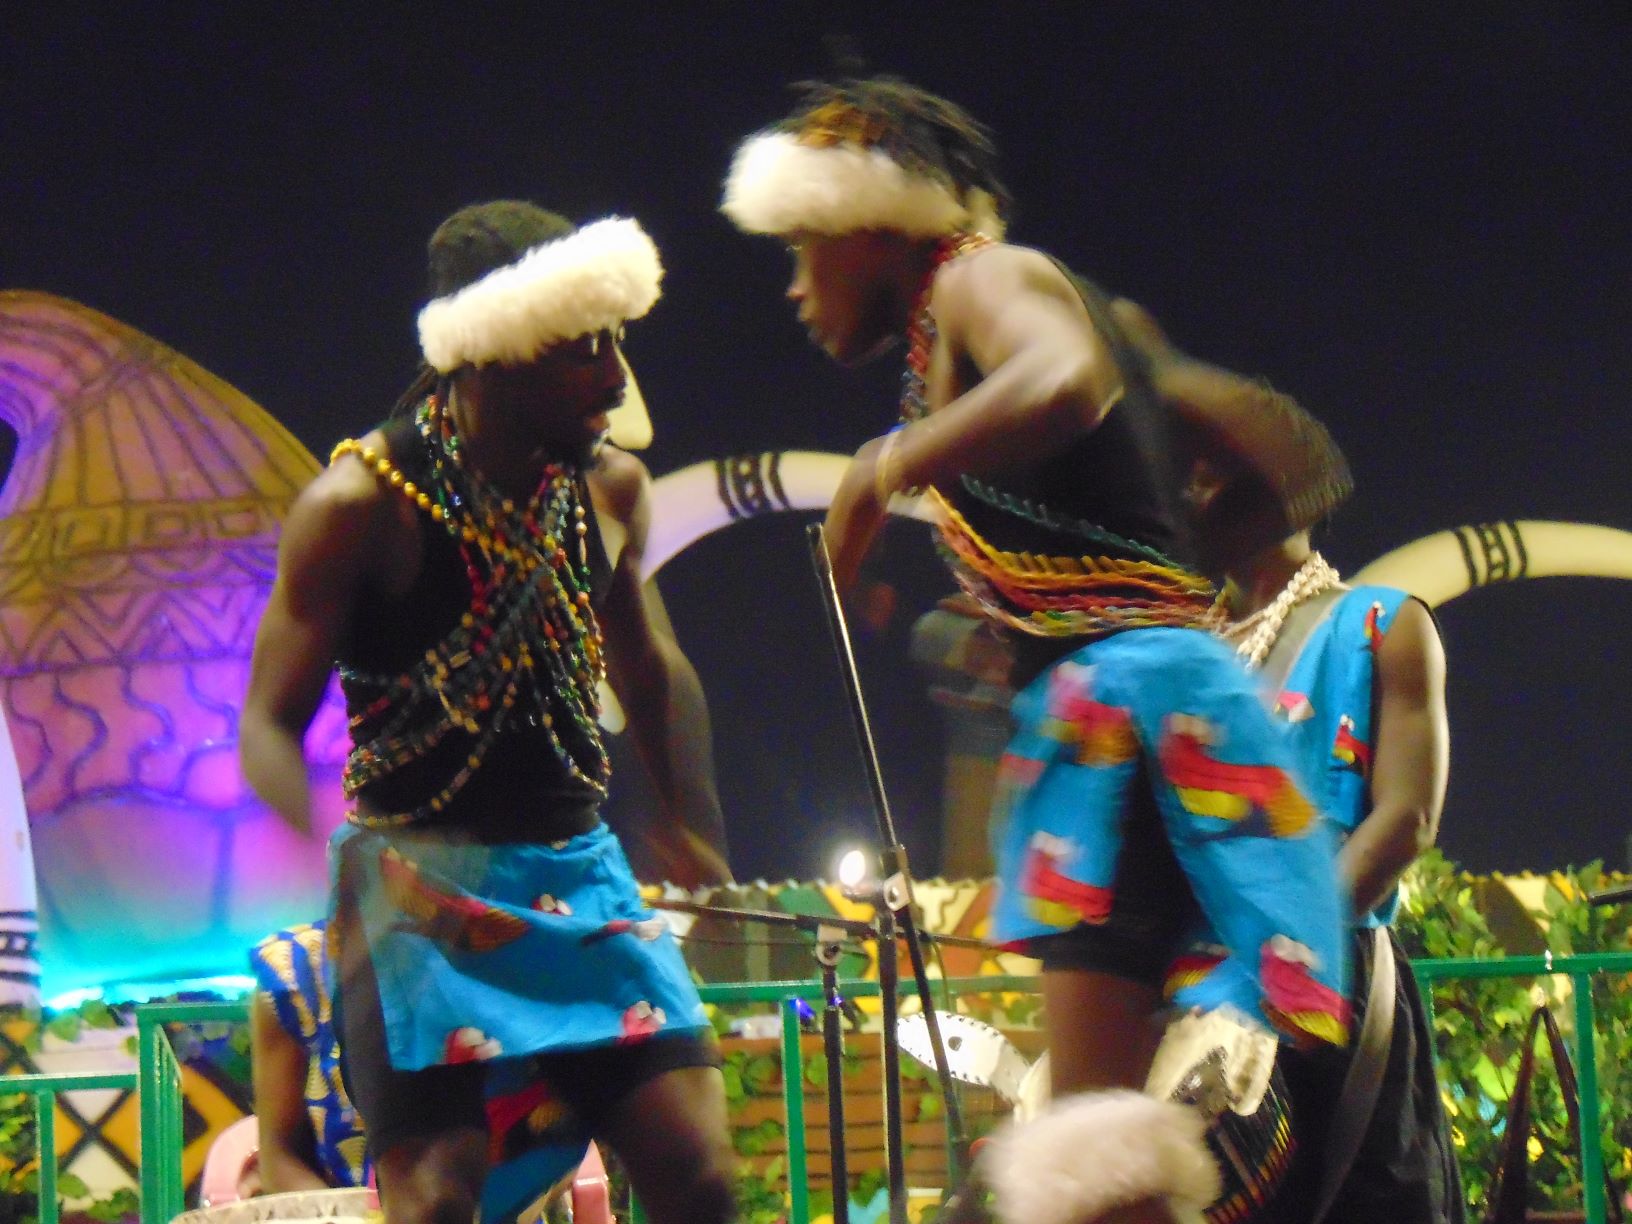 " Let me see ya go"
A dance performance by African Dancers.